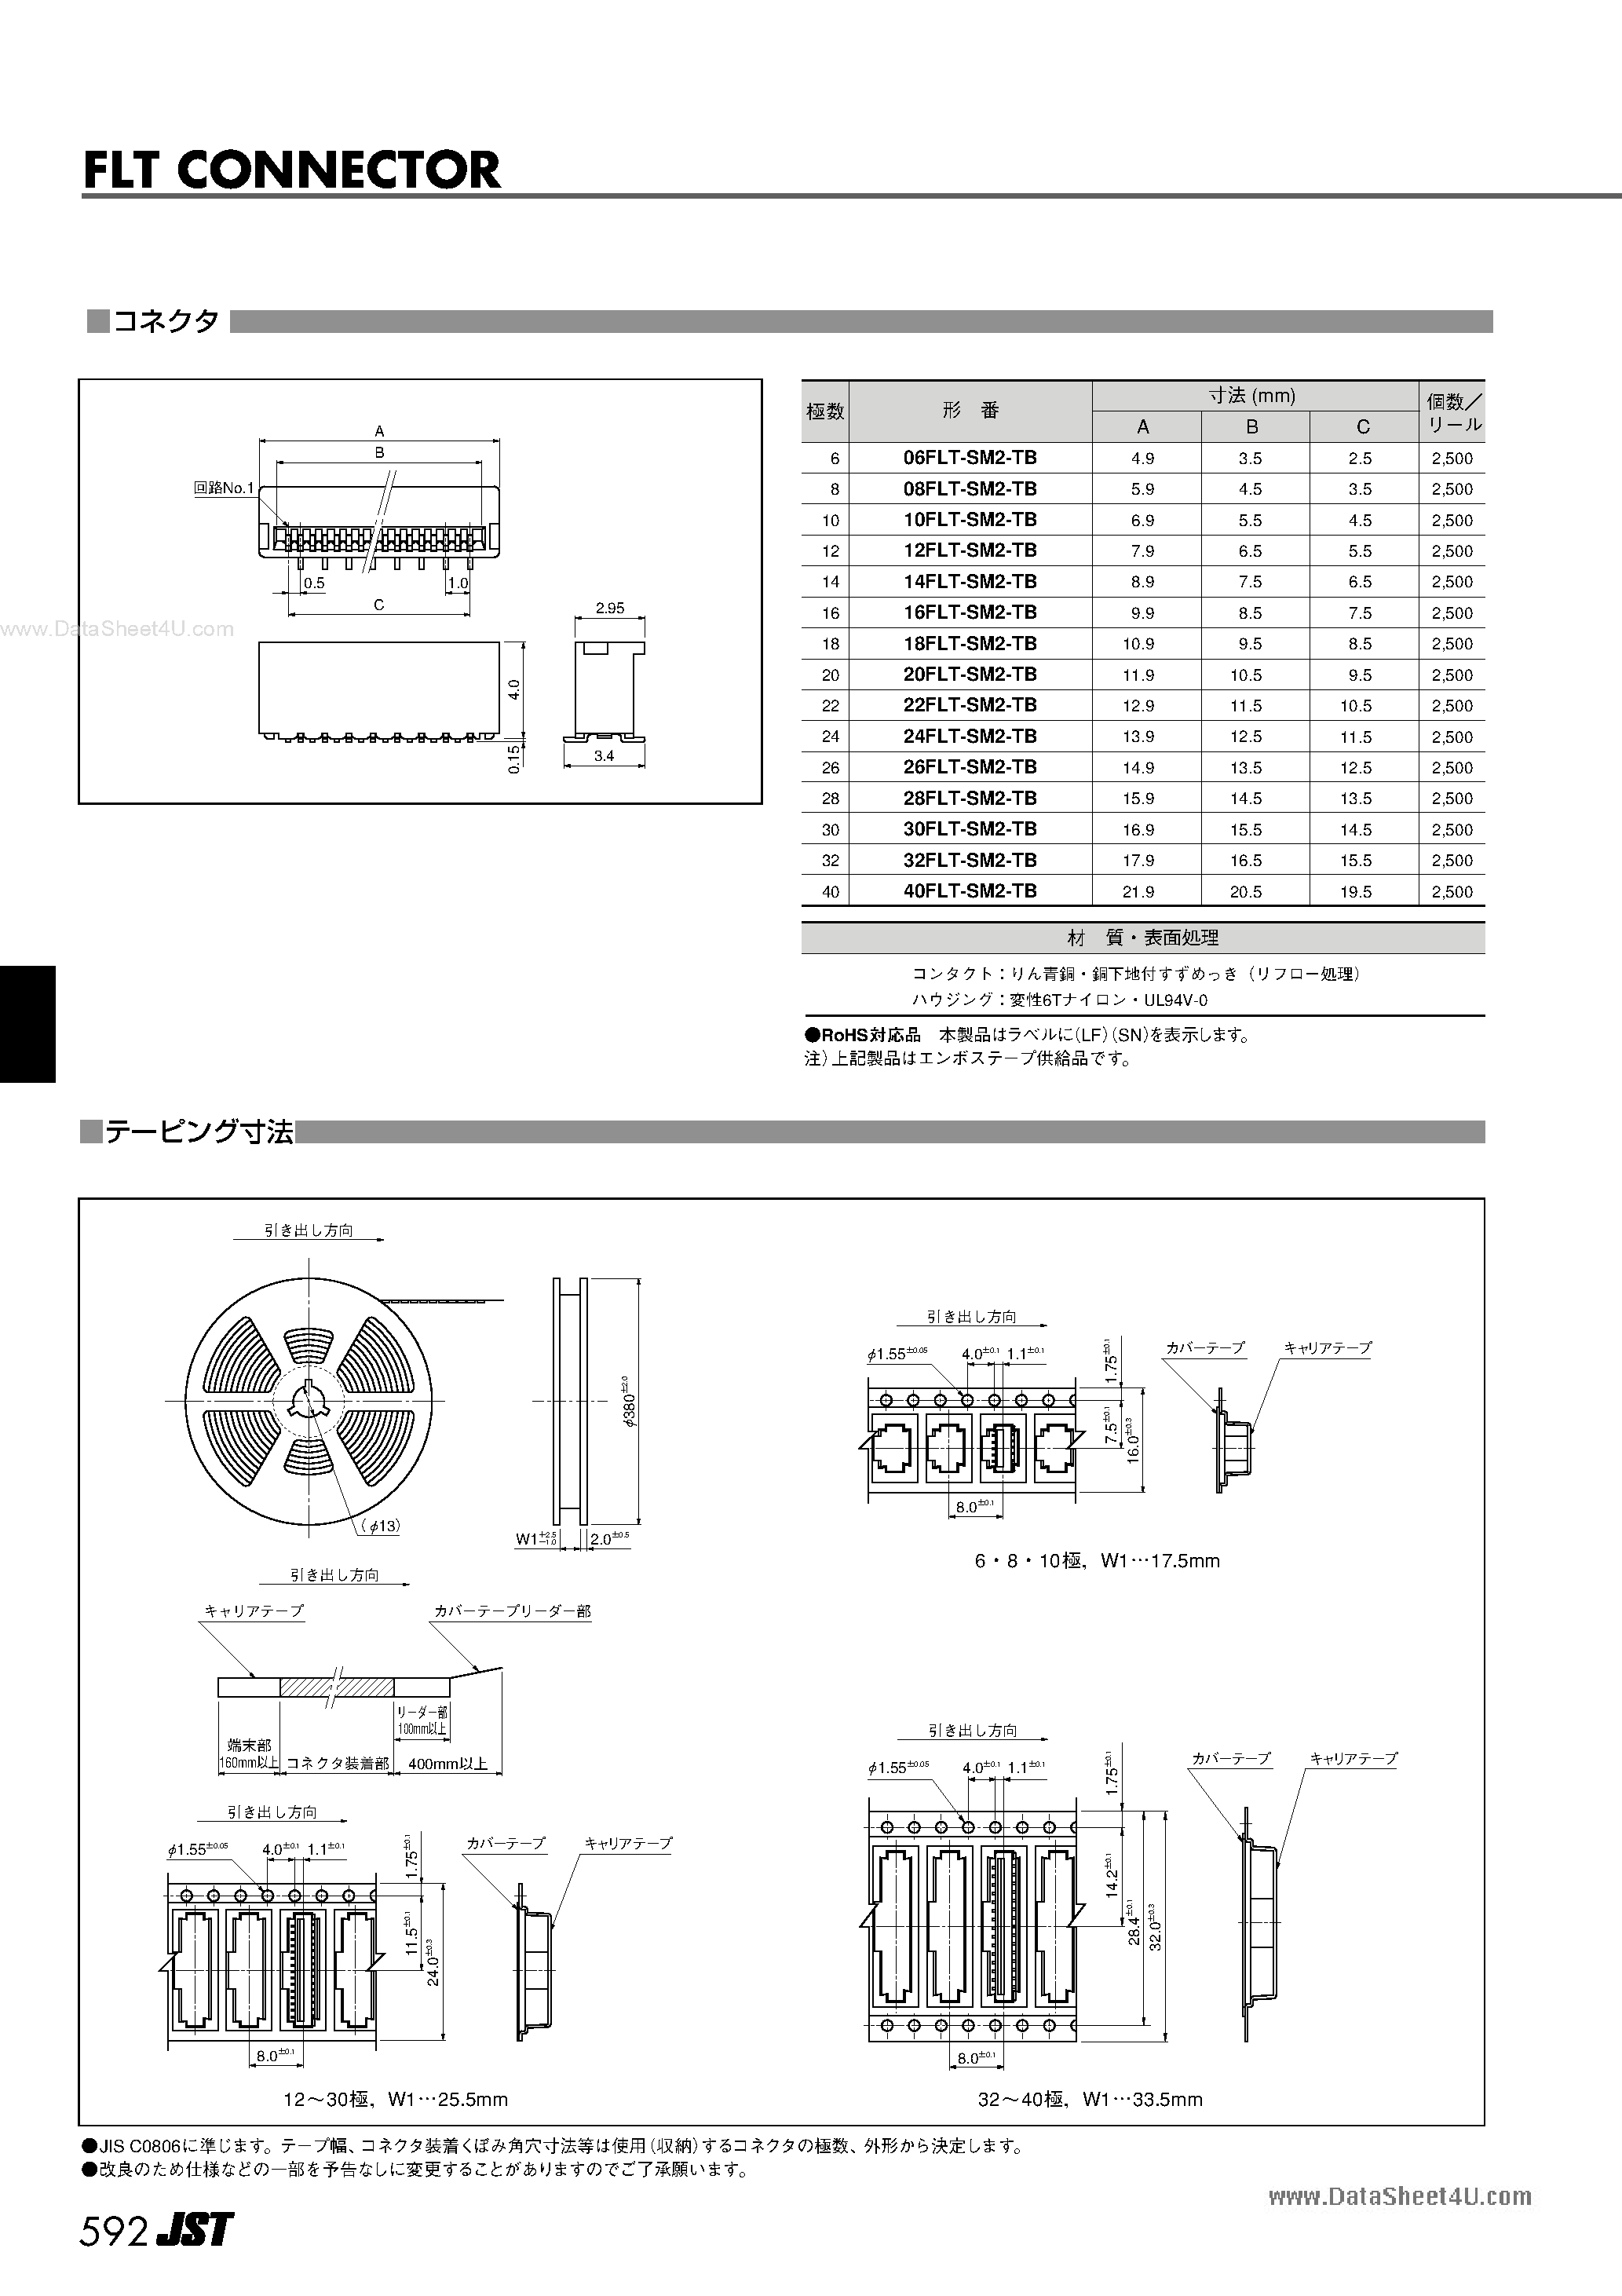 Datasheet 28FLT-SM2-TB - Connector page 2